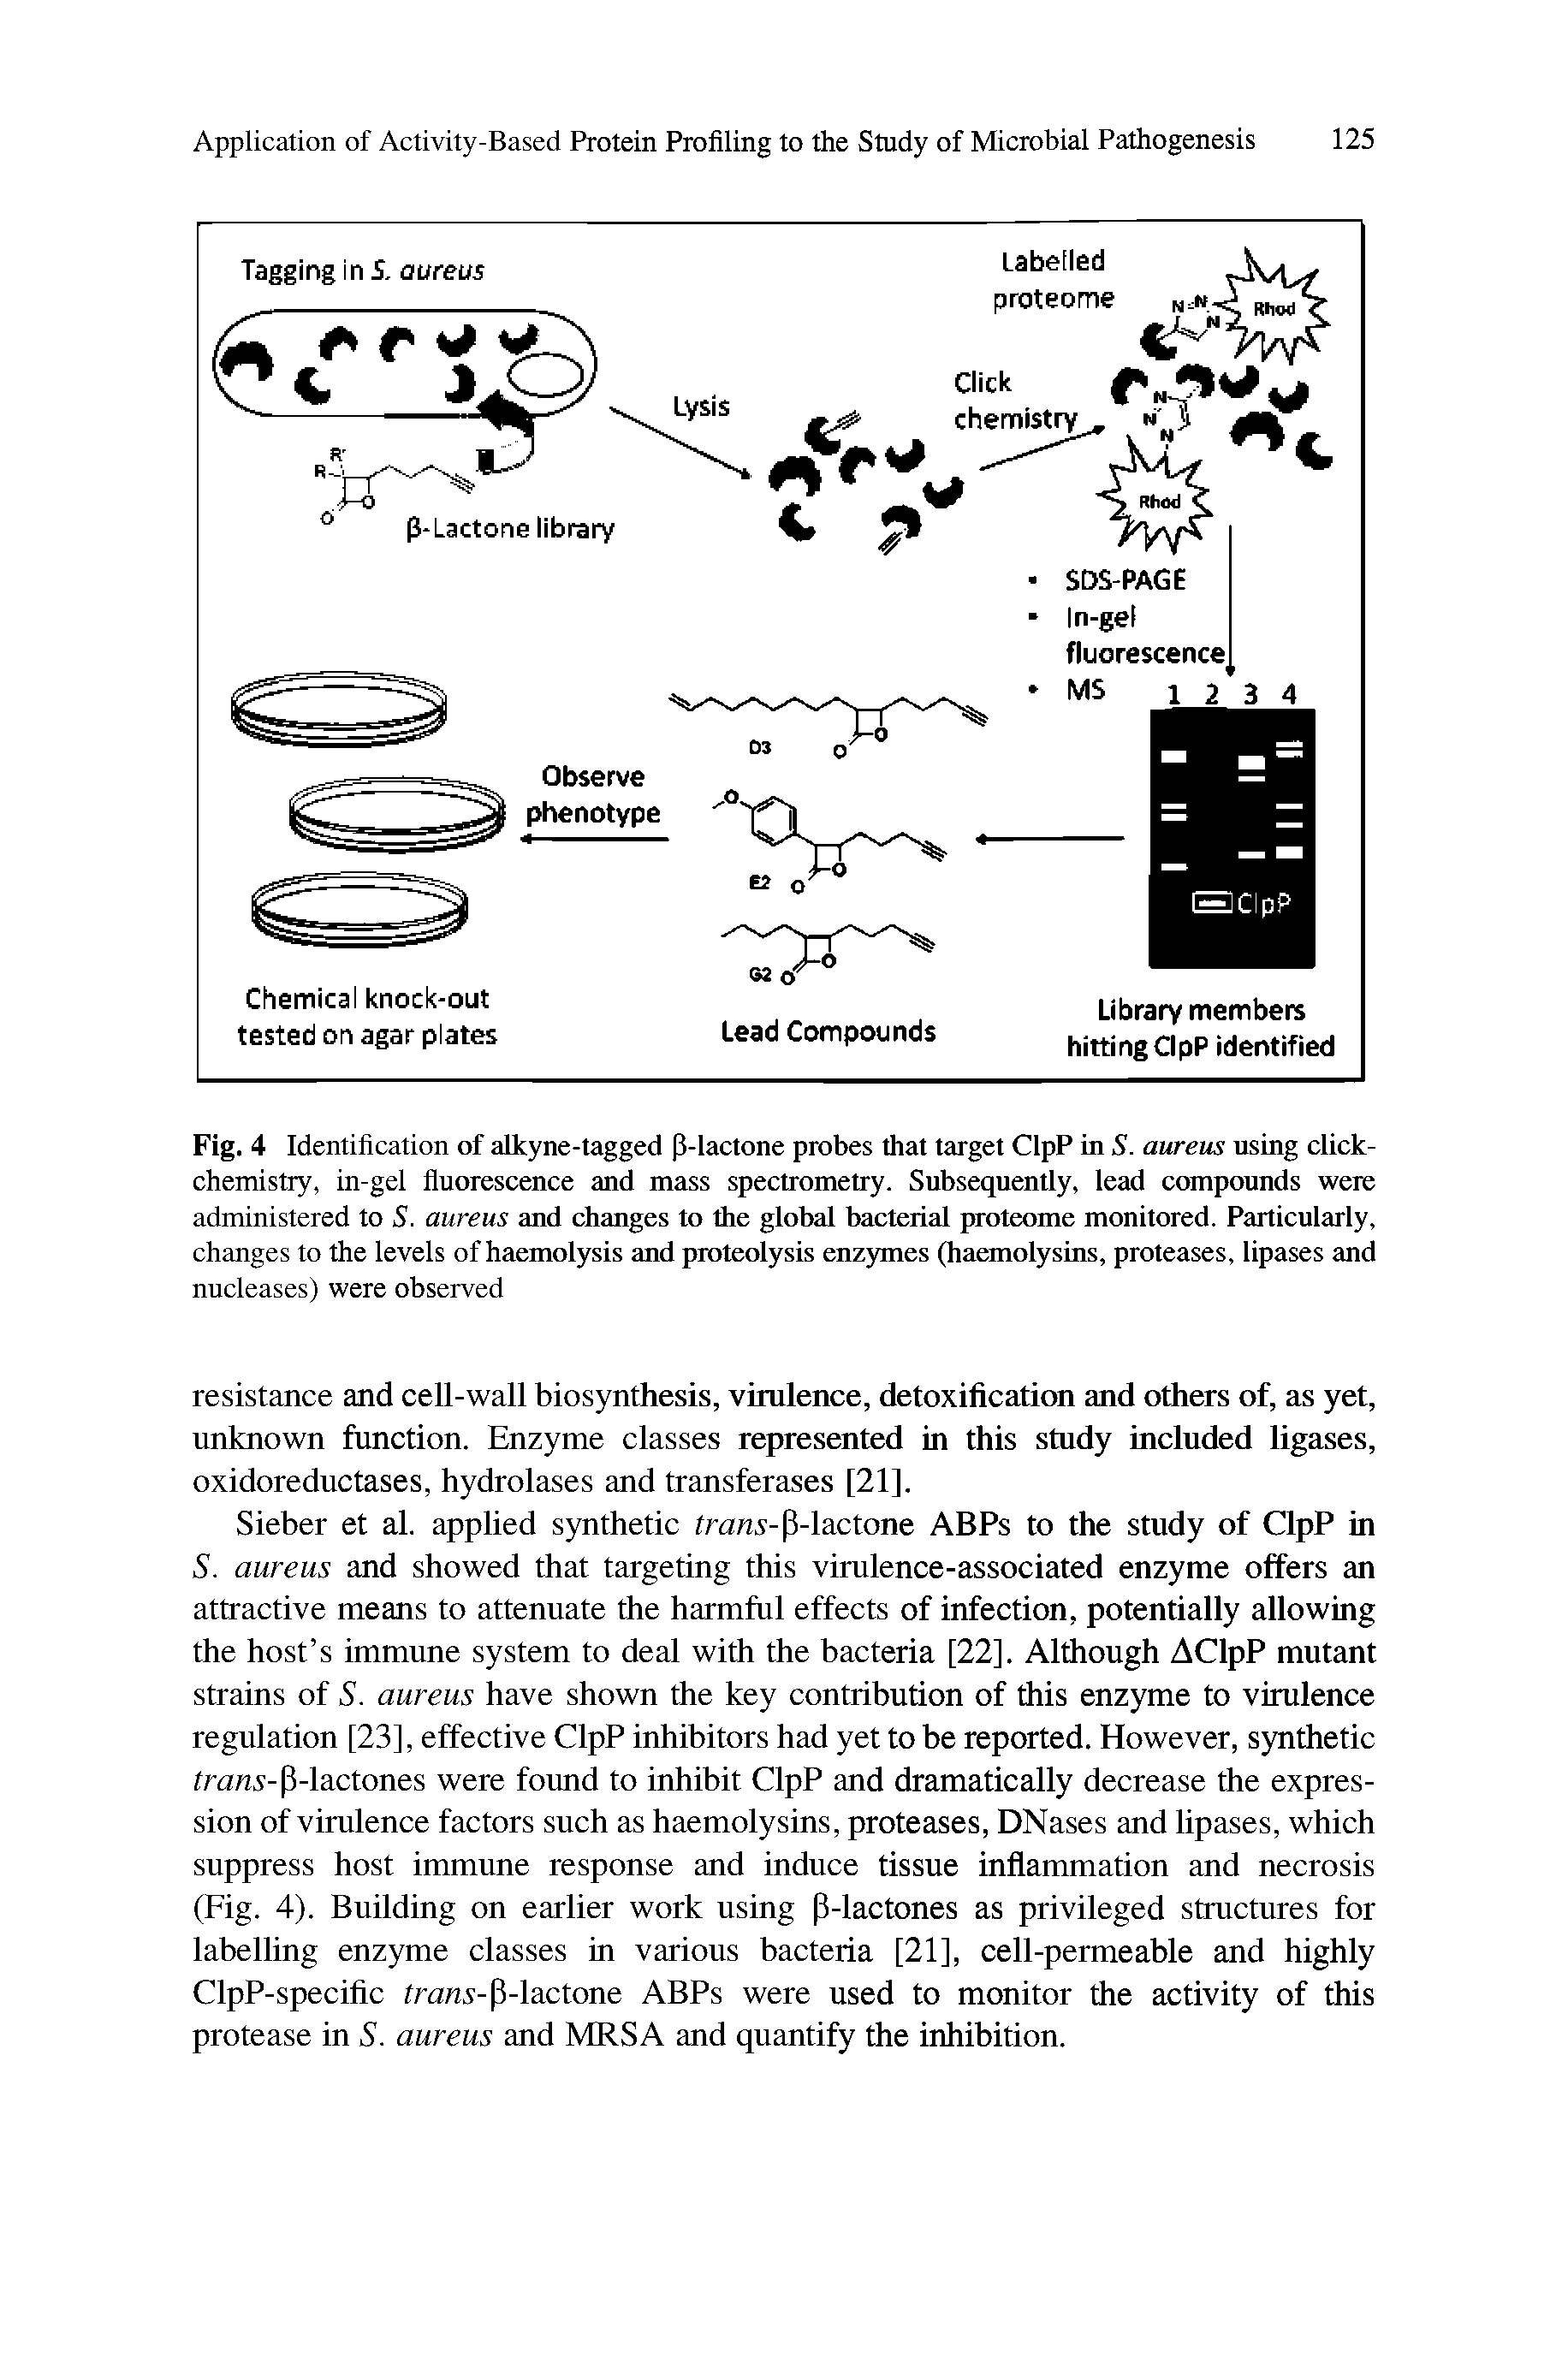 Fig. 4 Identification of alkyne-tagged P-lactone probes that target ClpP in S. aureus using click-chemistry, in-gel fluorescence and mass spectrometry. Subsequently, lead compounds were administered to 5. aureus and changes to the global bacterial proteome monitored. Particularly, changes to the levels of haemolysis and proteolysis enzymes (haemolysins, proteases, lipases and...